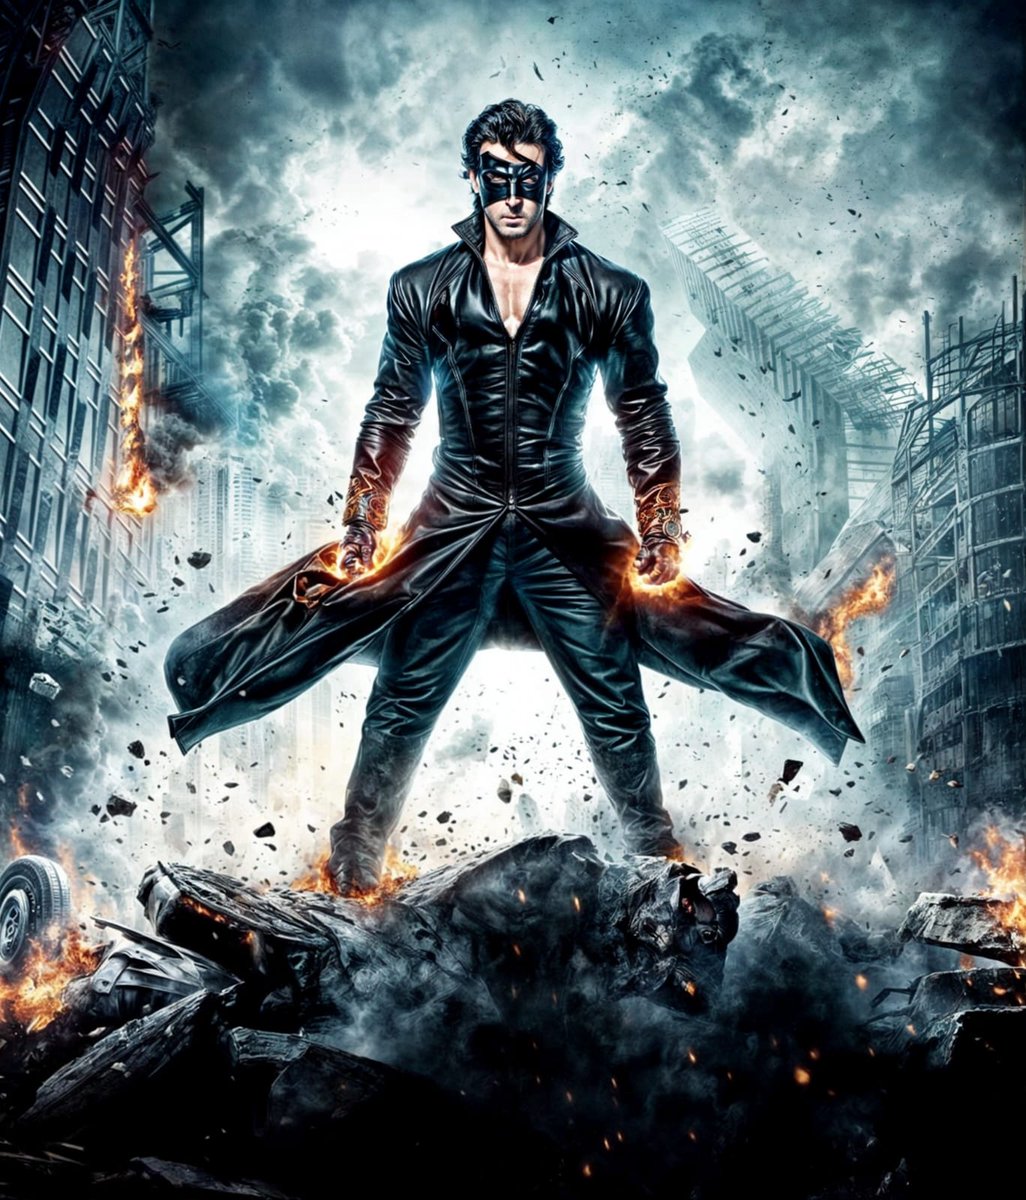 He Is Cominggggg #Krrish4 💥